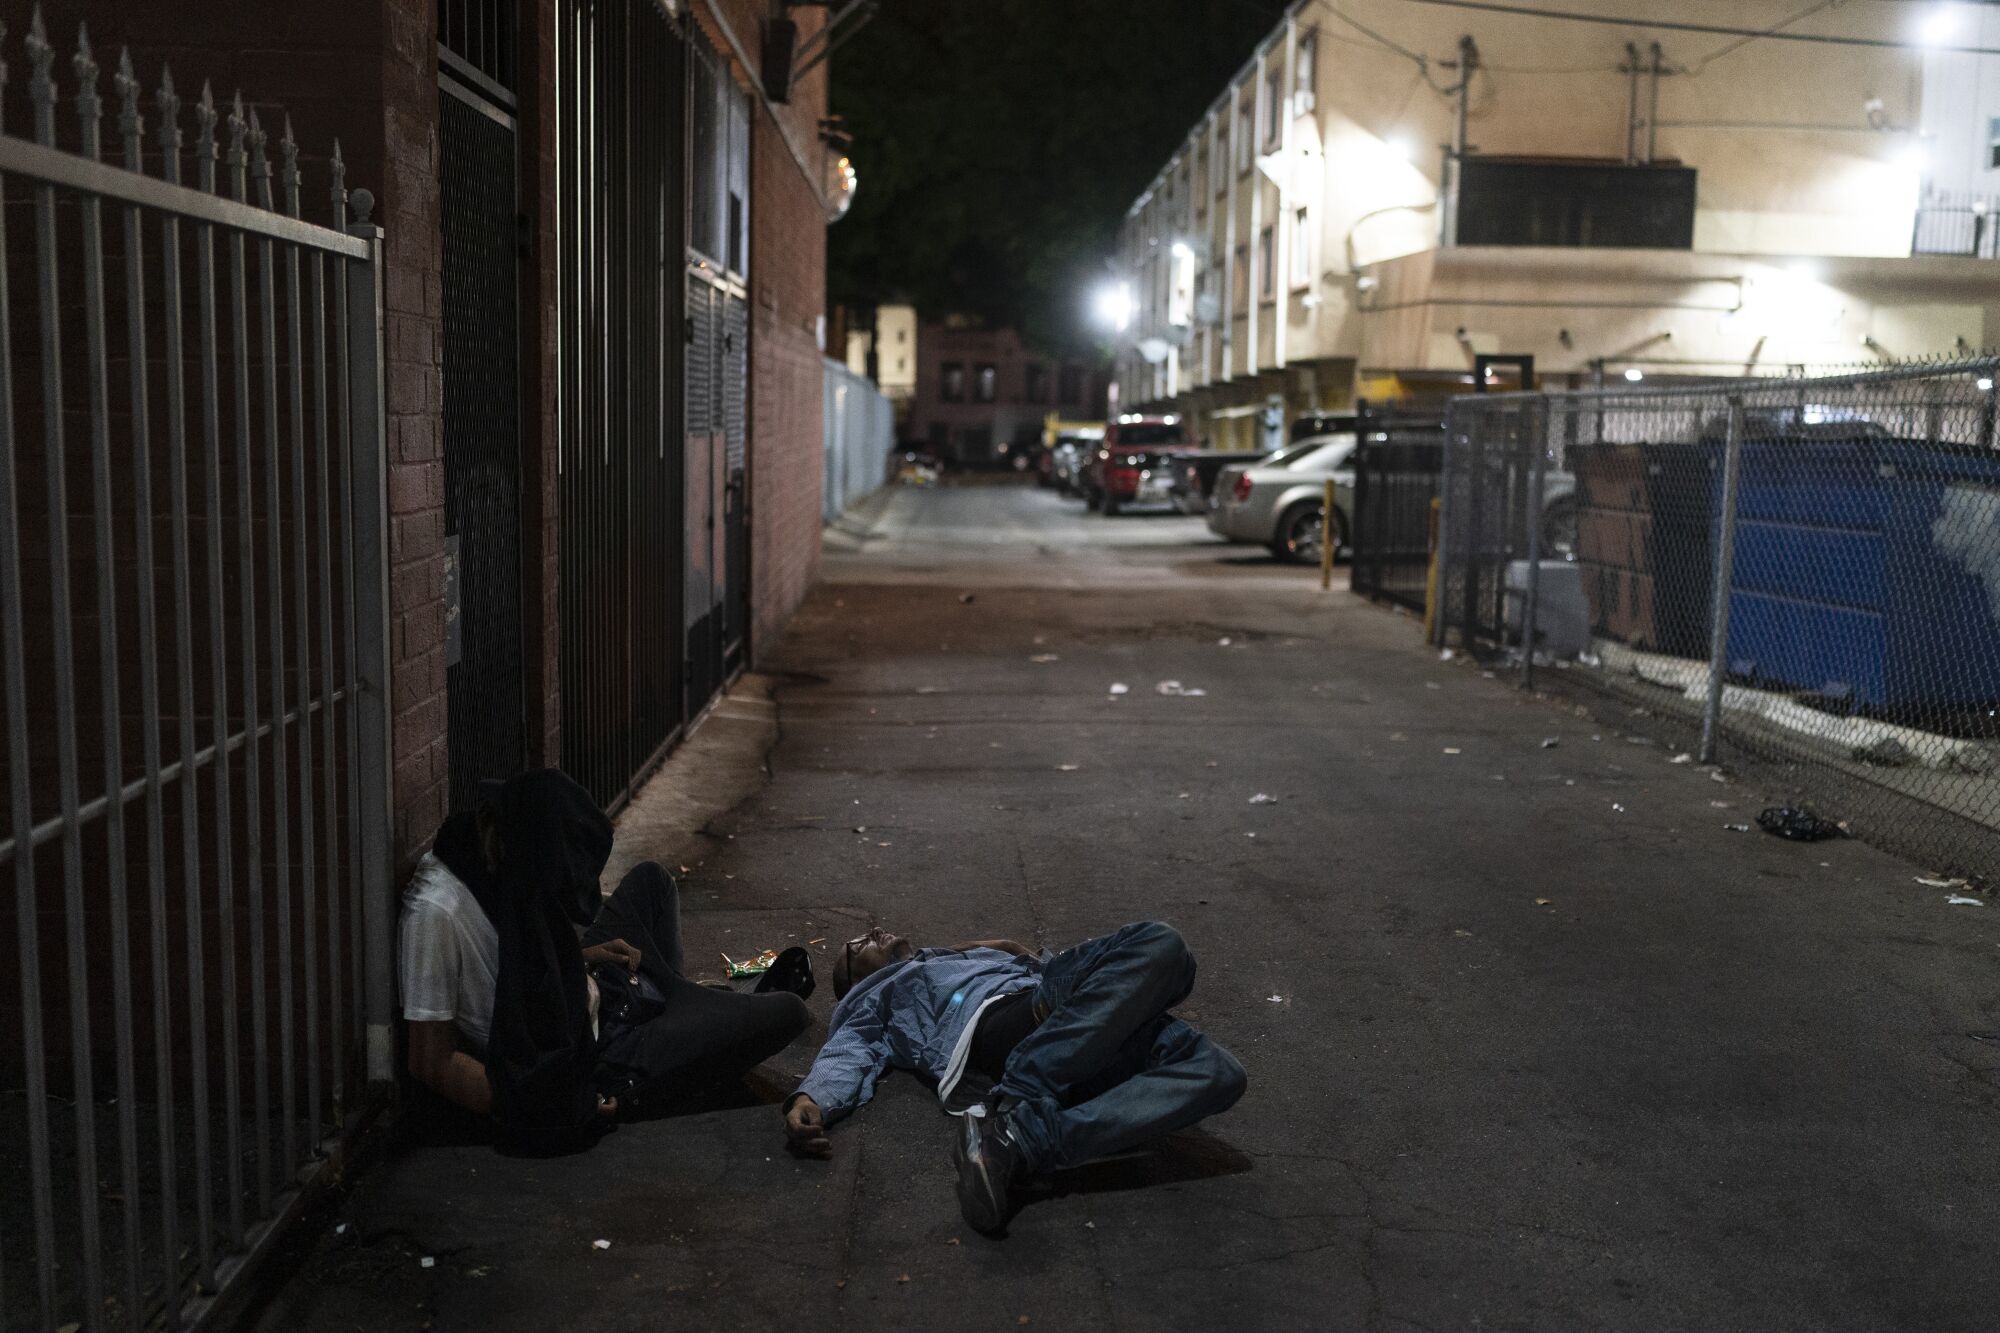 Two drug users sleep in an alley in Los Angeles.